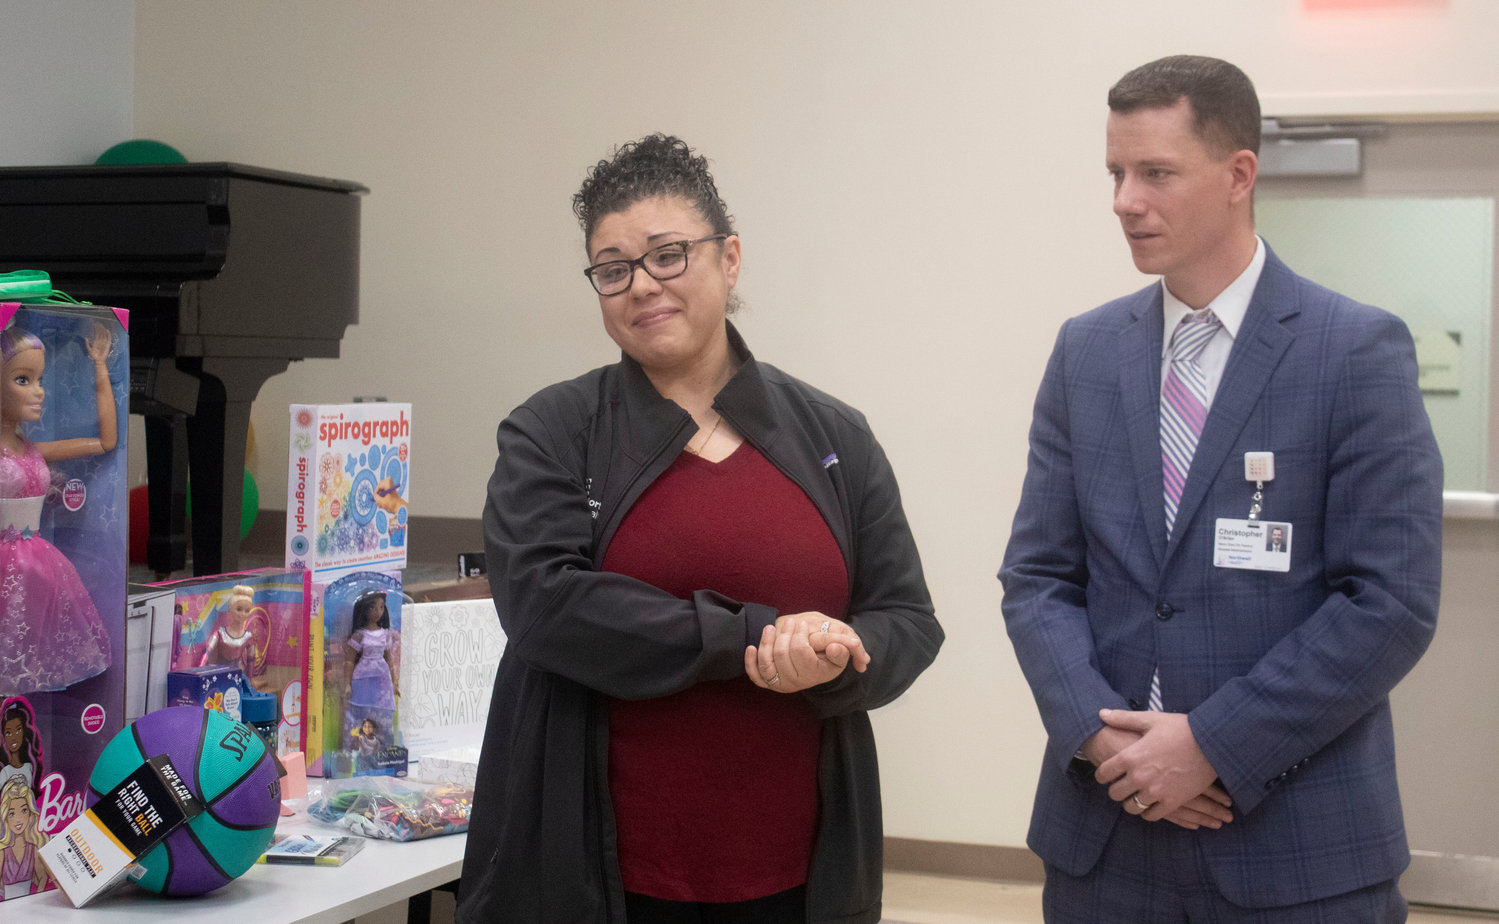 Luz Bove was overcome with emotion at LIJ Valley Stream when she saw all the Christmas gifts made possible by Chris O’Brien and other Northwell employees.